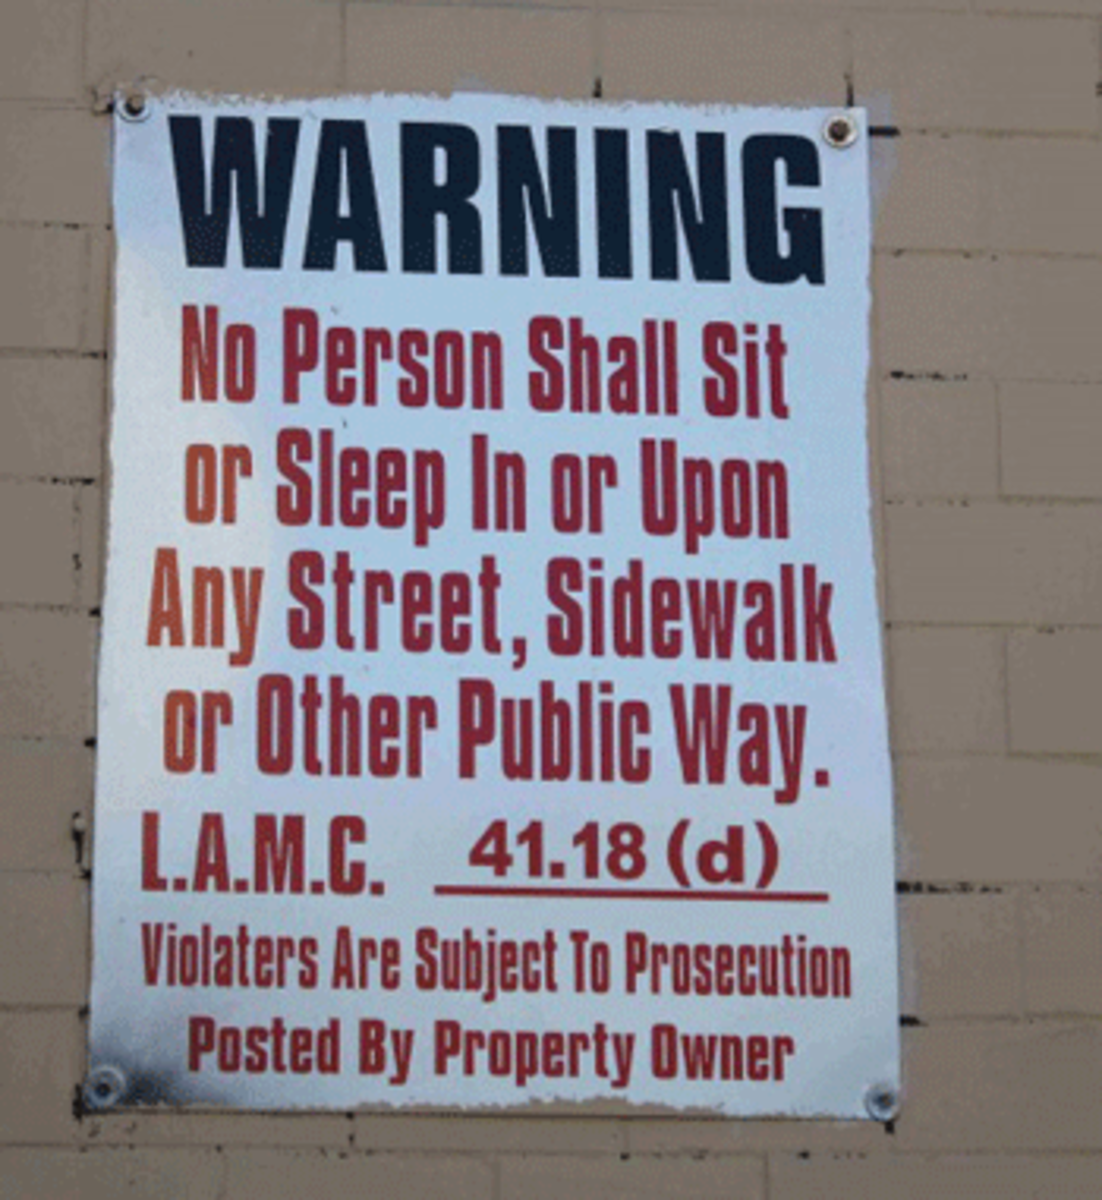 A sign posted on a building in Skid Row hangs as a constant reminder of an LA municipal code that critics say discriminates against the homeless. (Dan Bluemel / LA Activist)